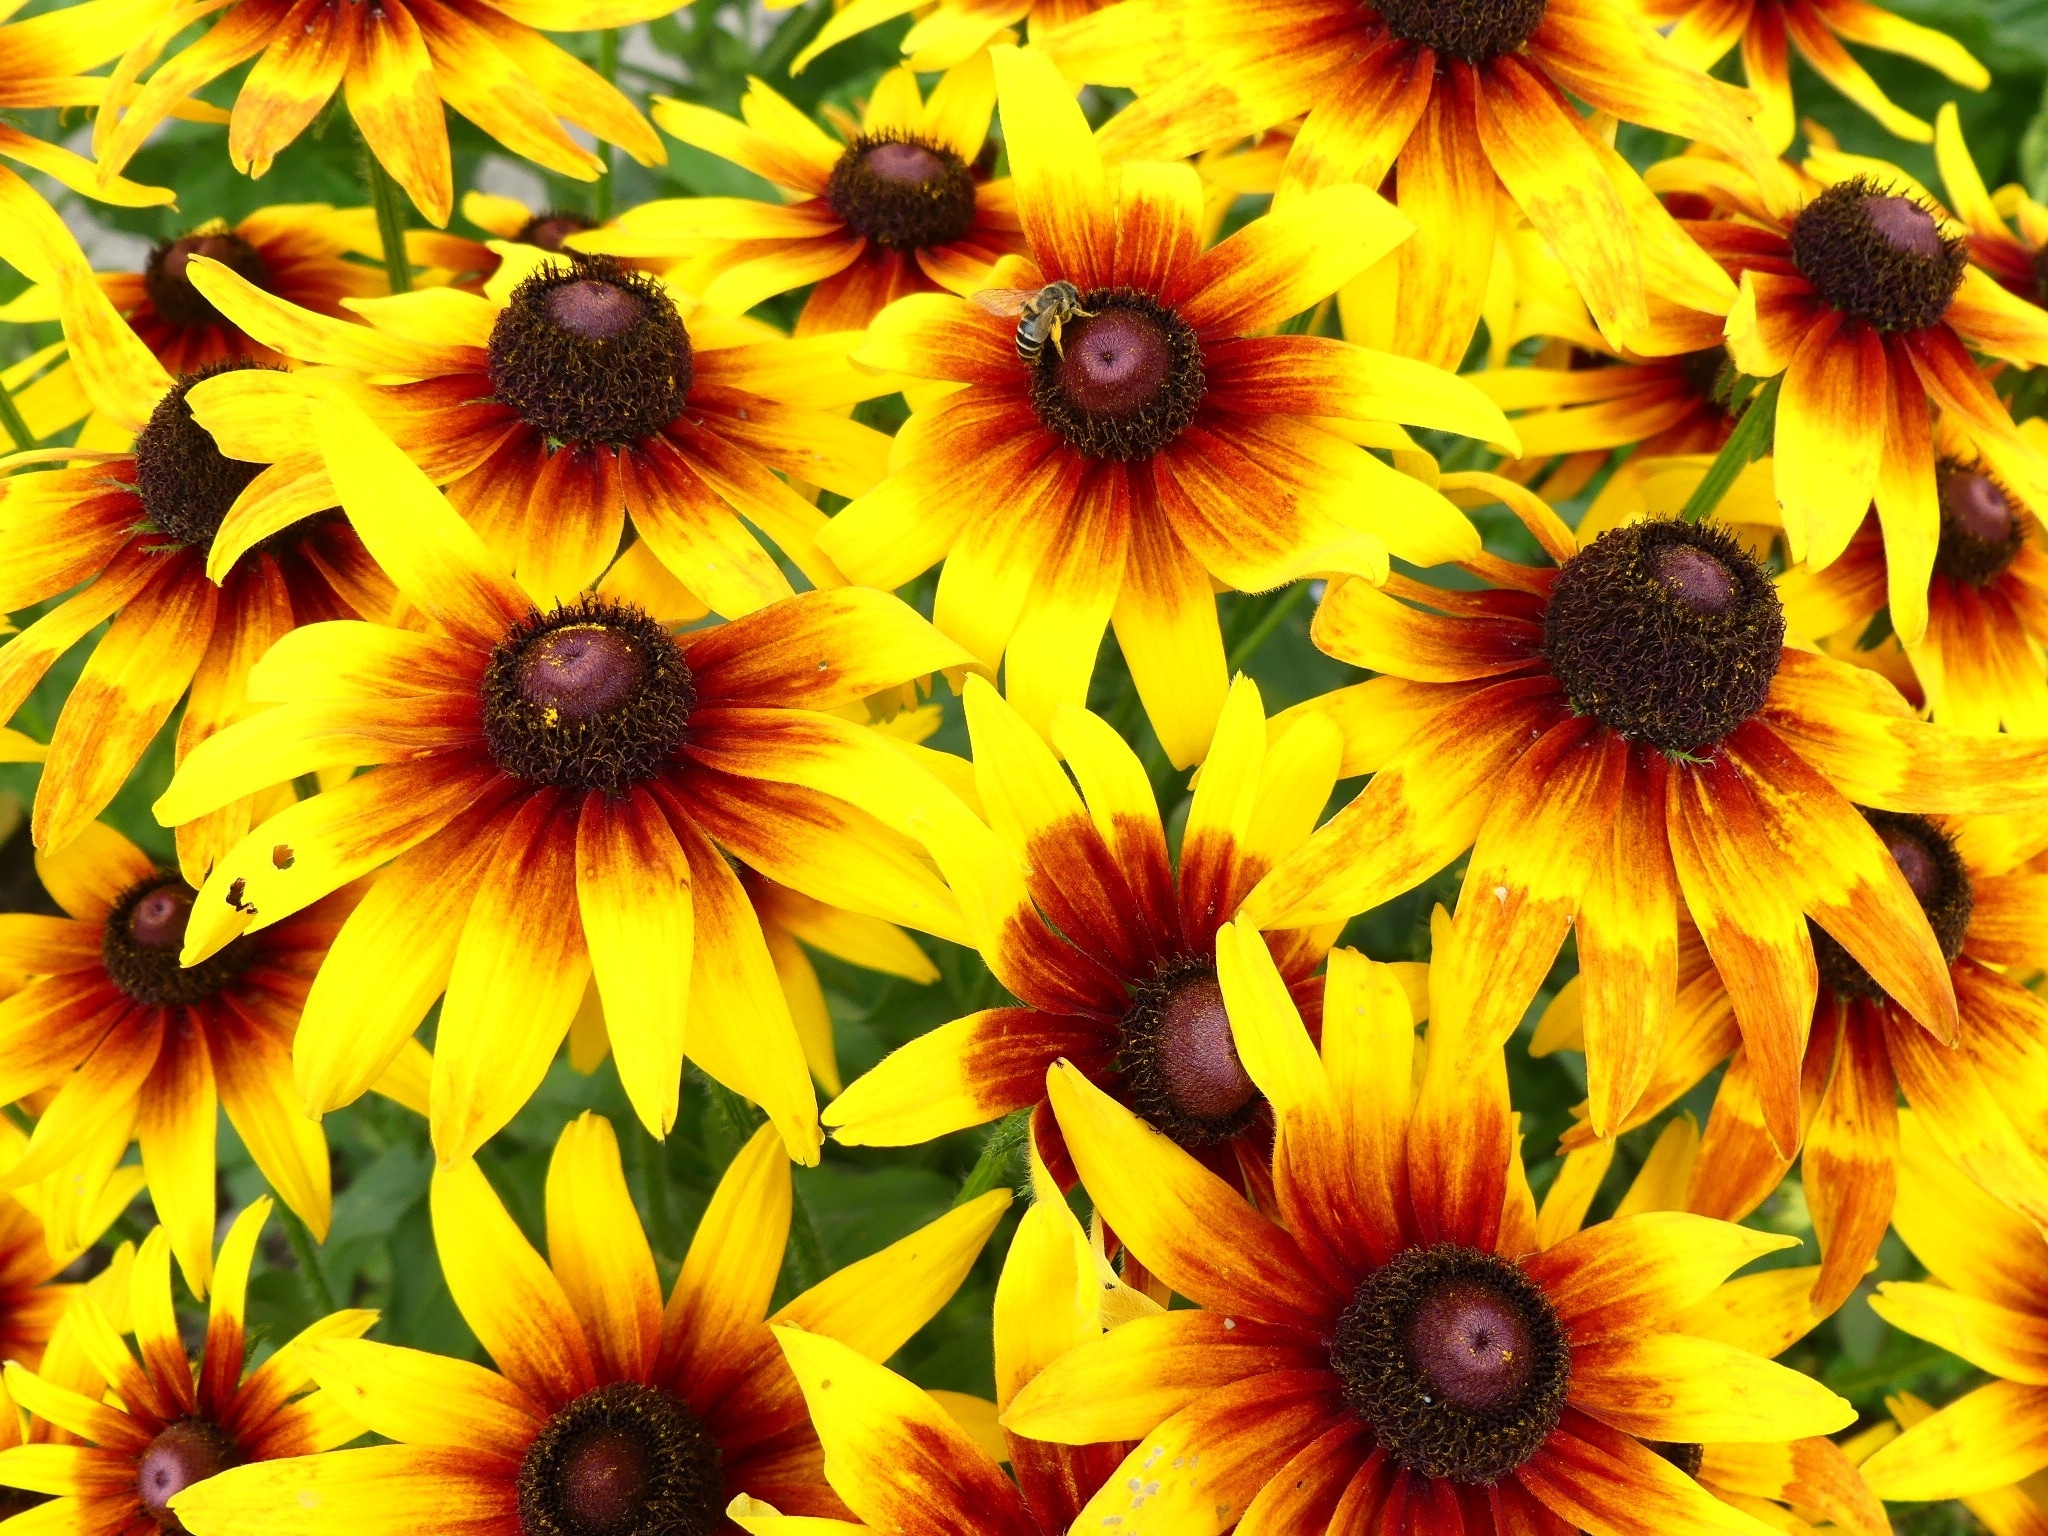 yellow and red sunflowers